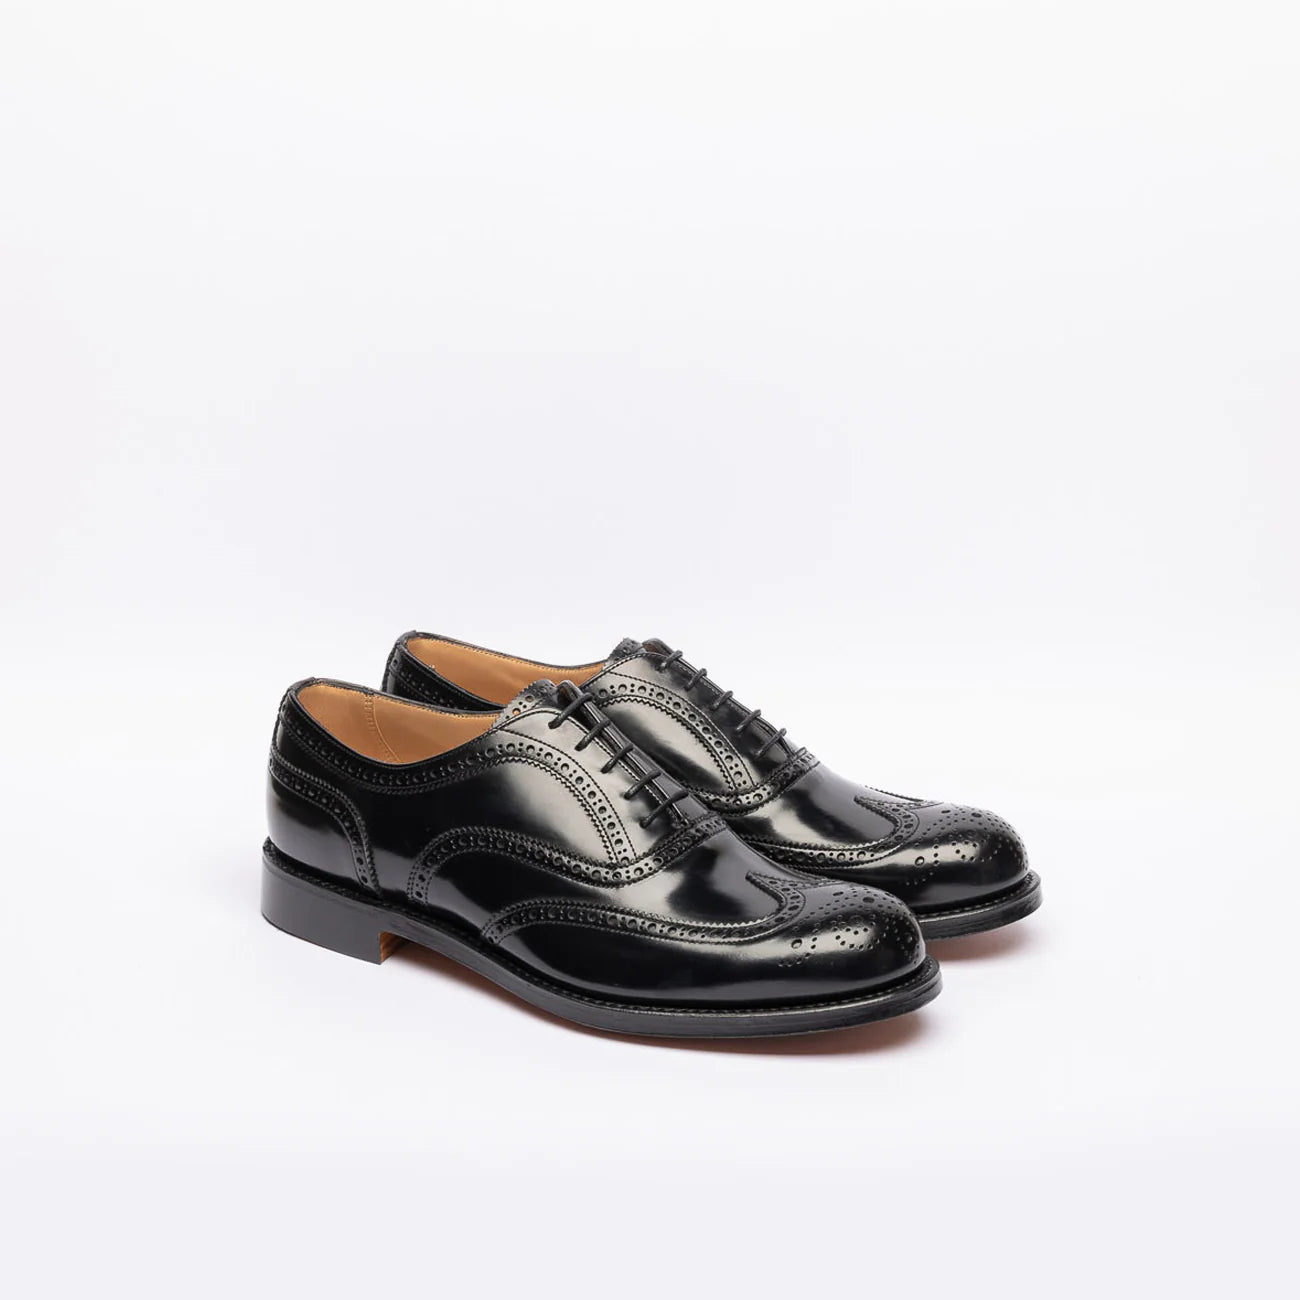 Cheaney Arthur III lace-up shoe in black leather